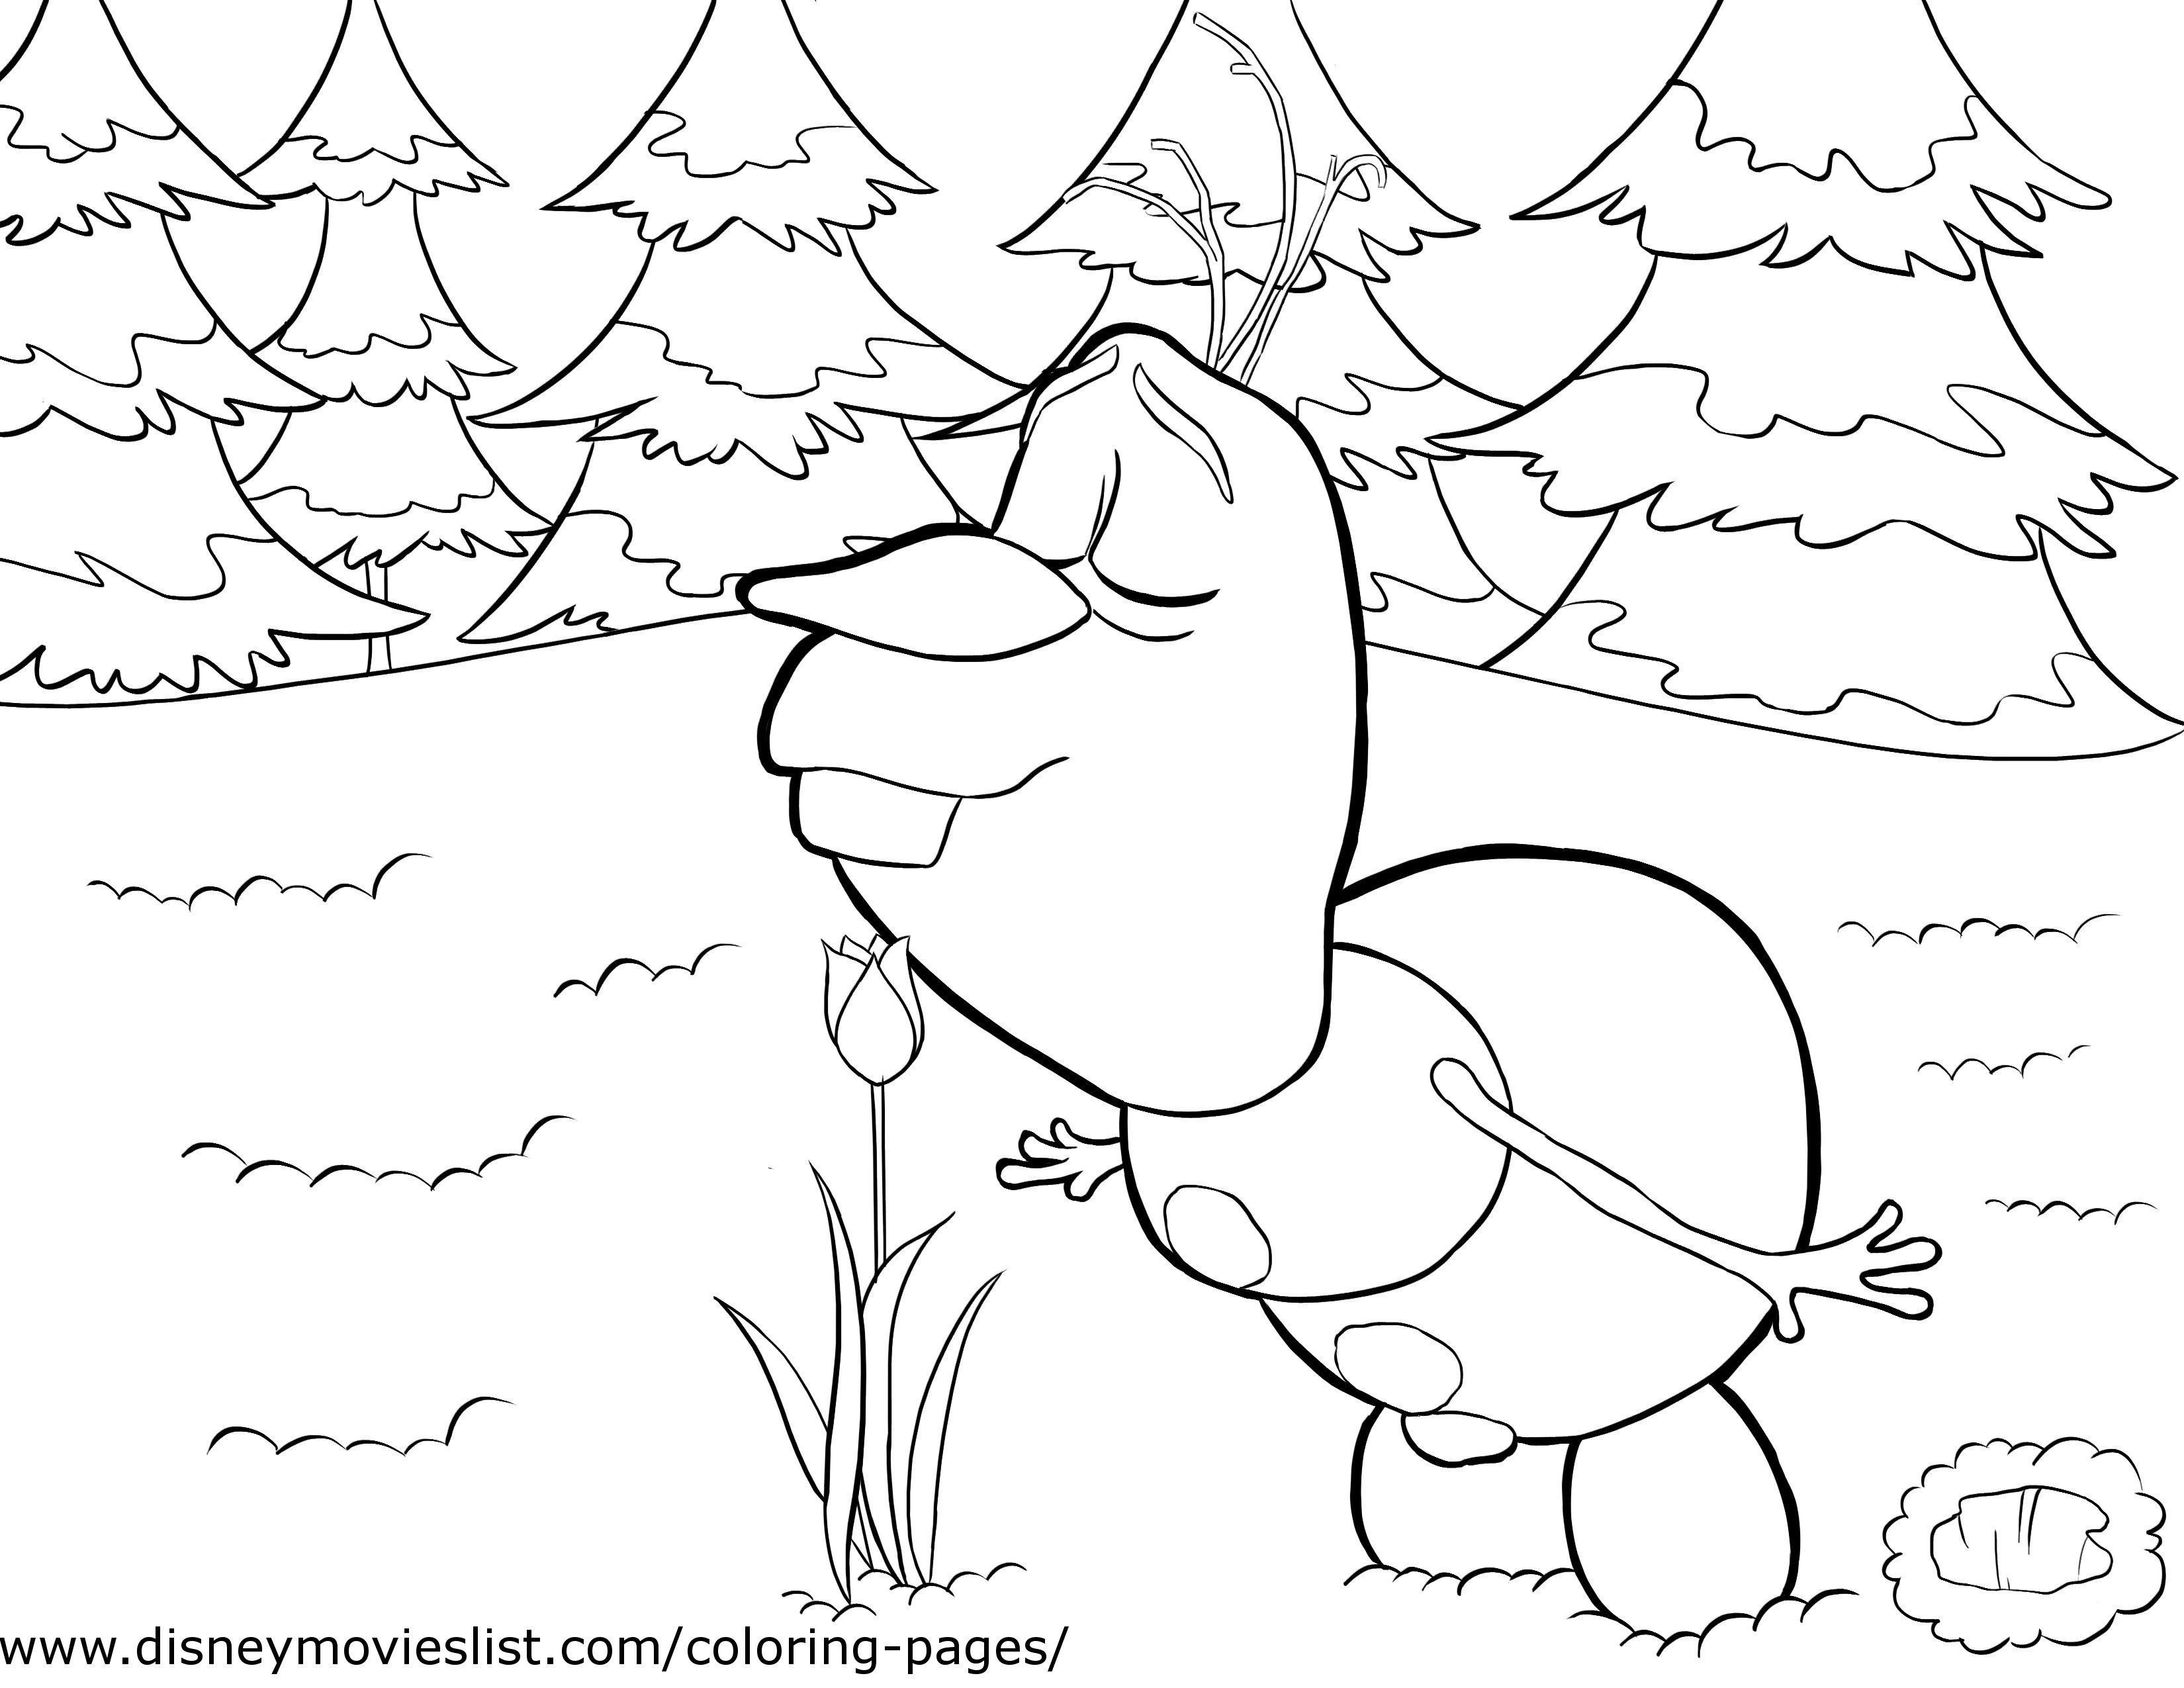 Disney&amp;#039;s Frozen Coloring Pages, Free Disney Printable Frozen Color - Free Printable Frozen Coloring Pages